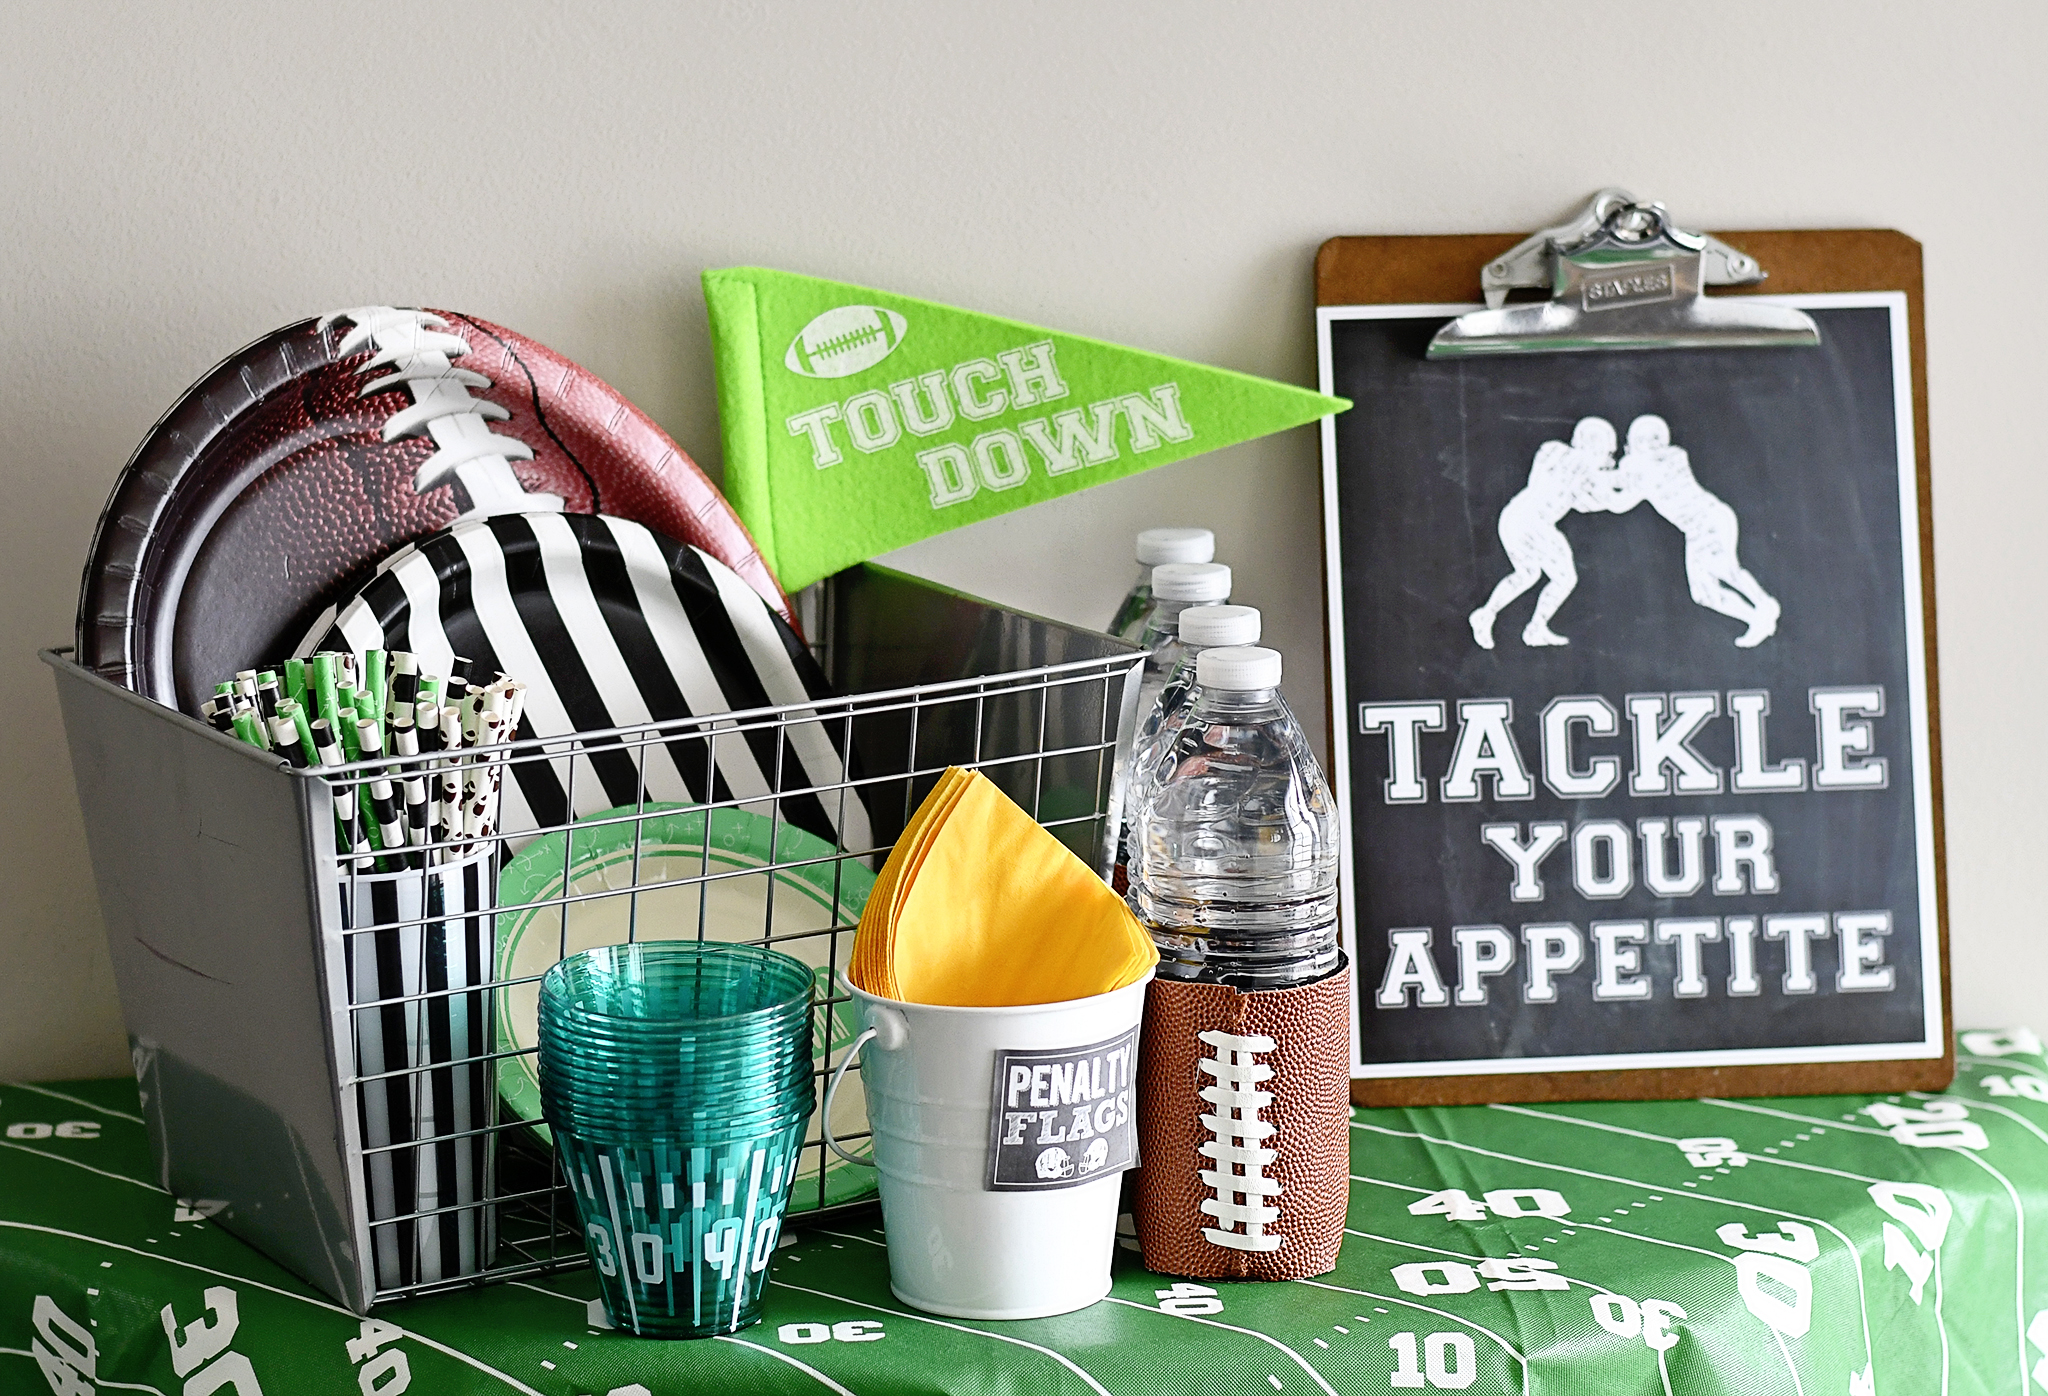 Tackle your Appetite on Game Day!